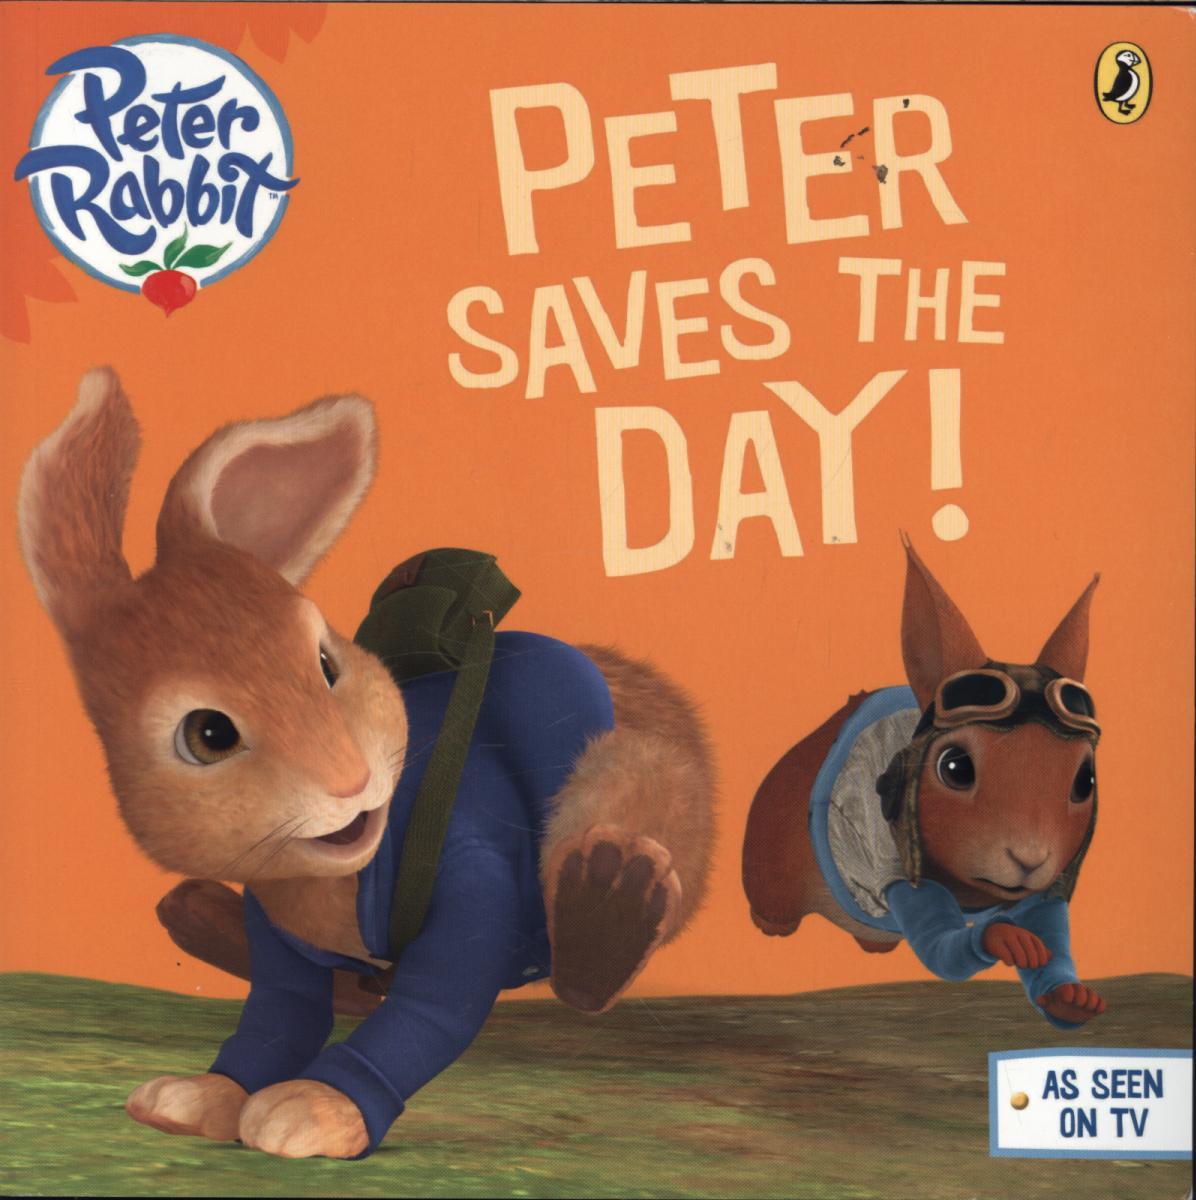 Peter Rabbit Animation: Peter Saves the Day!